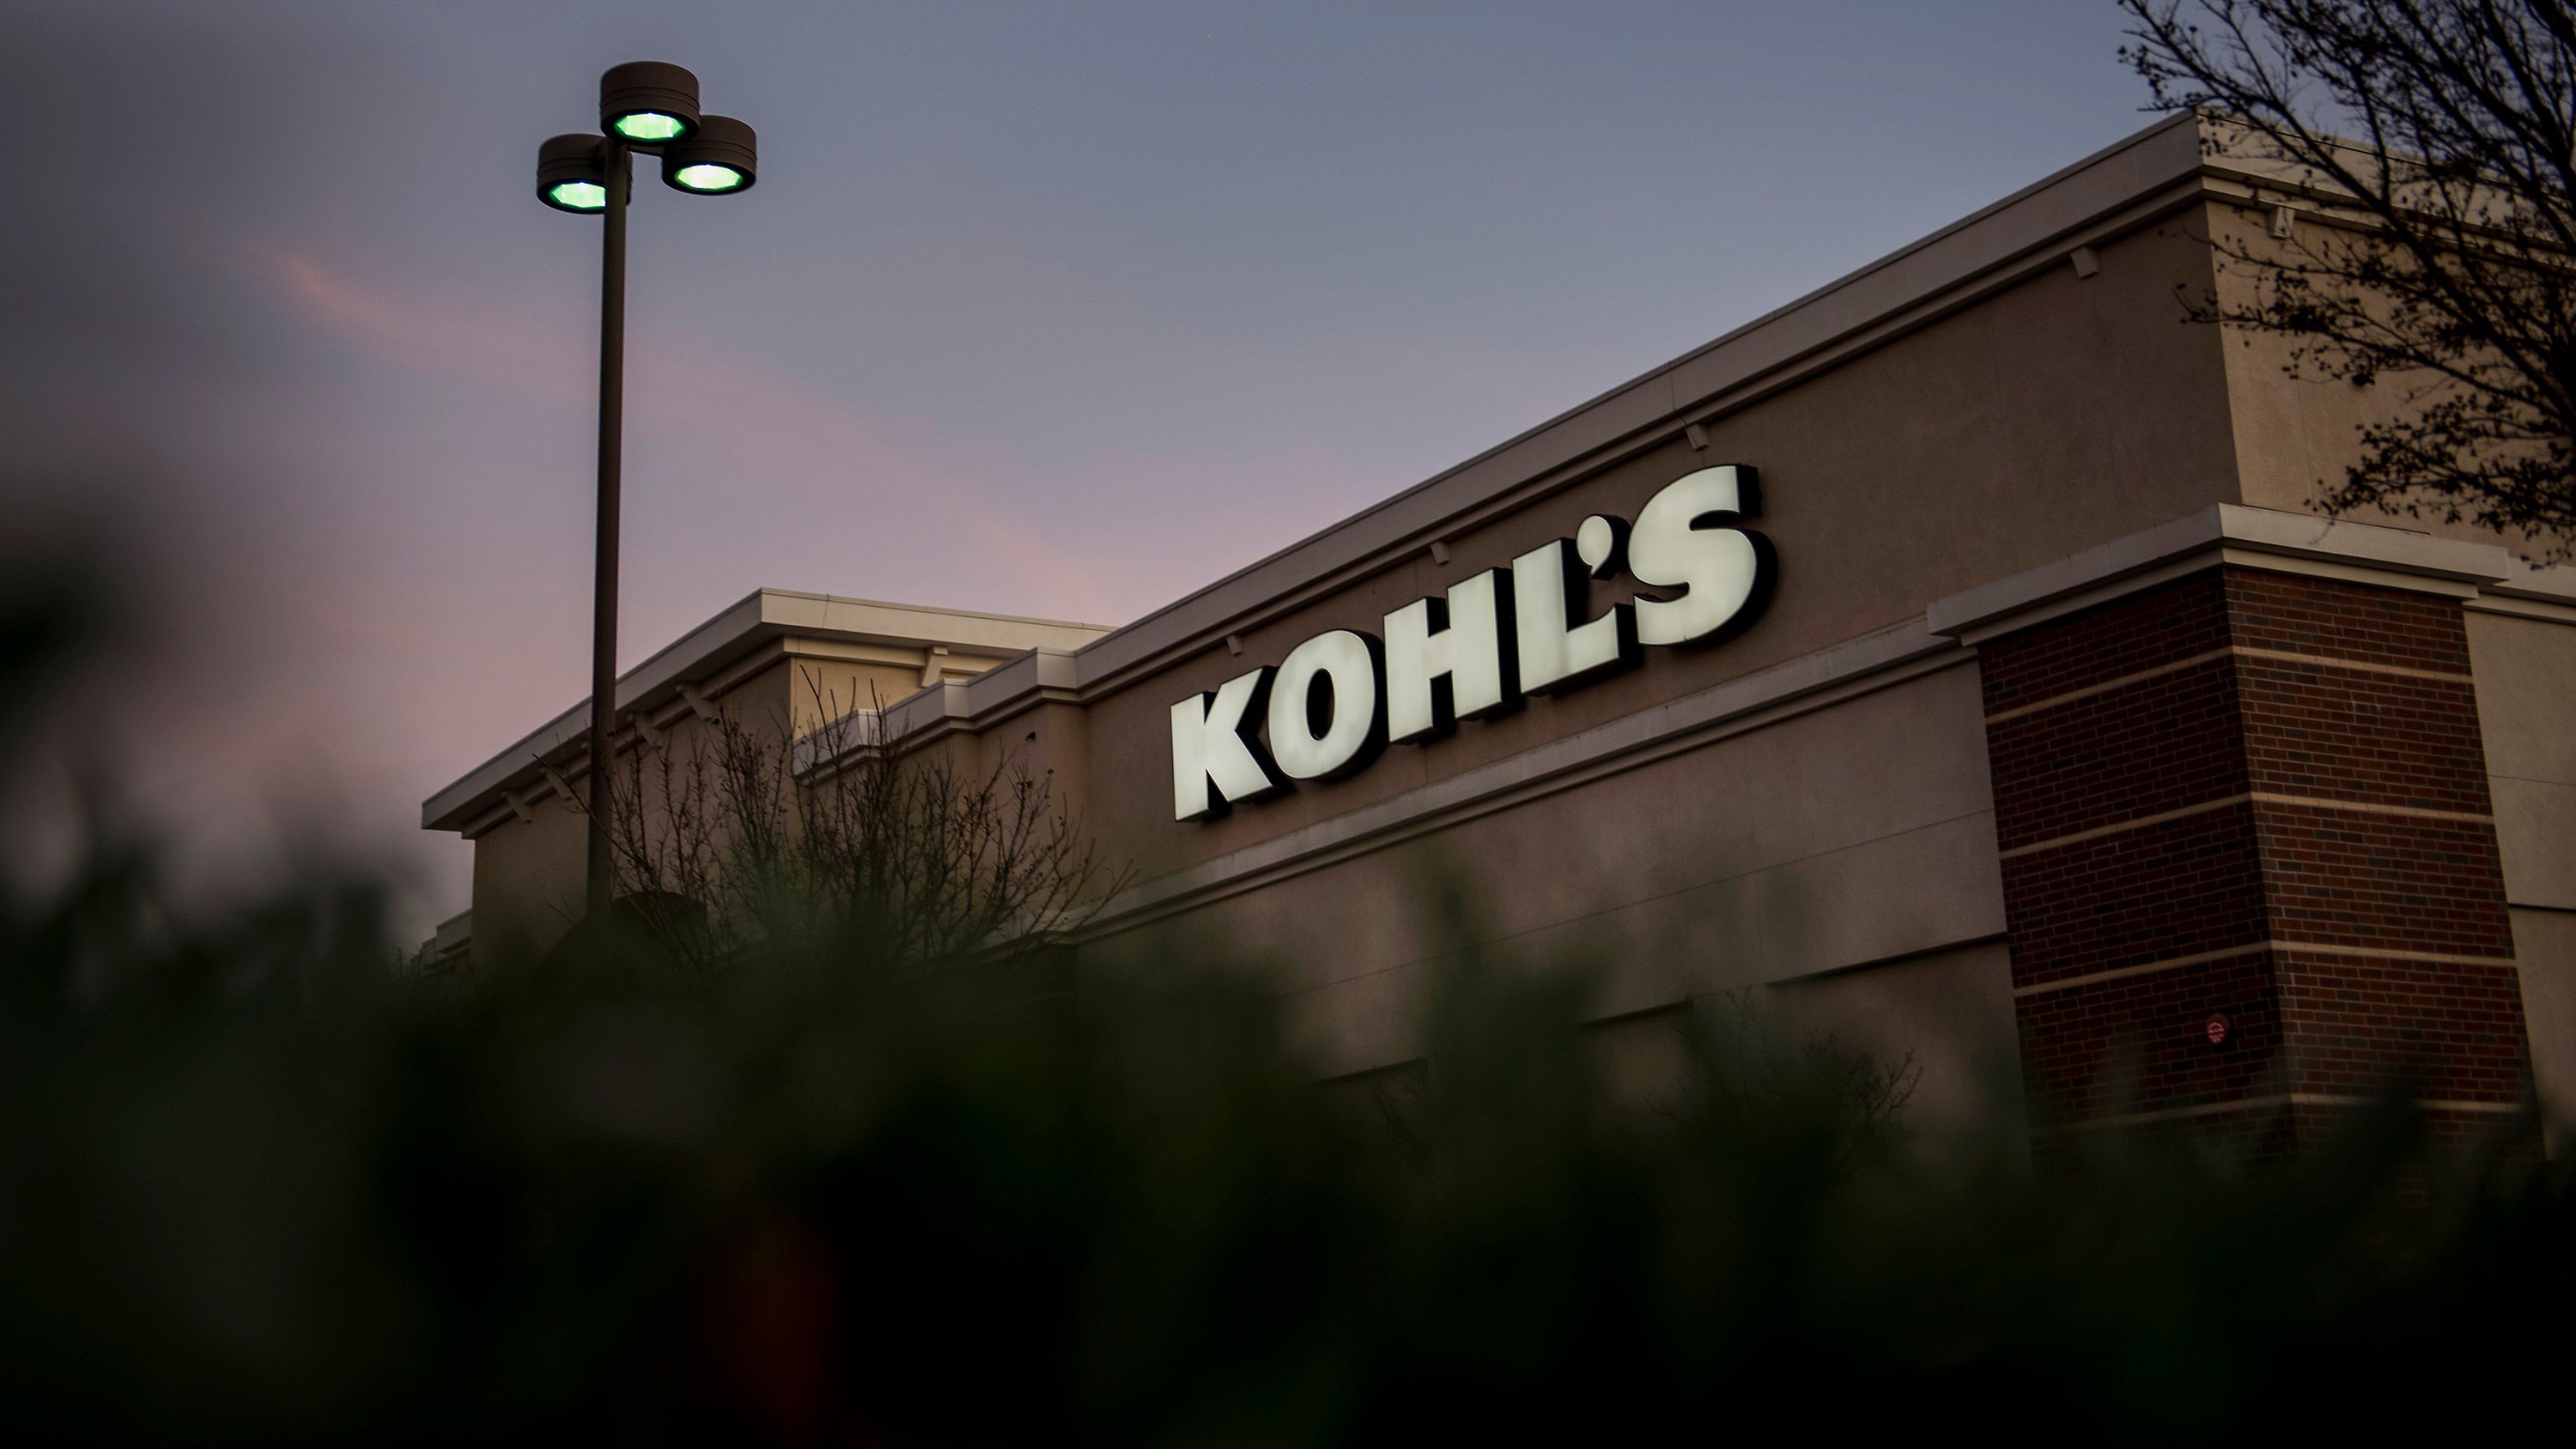 About Kohl's